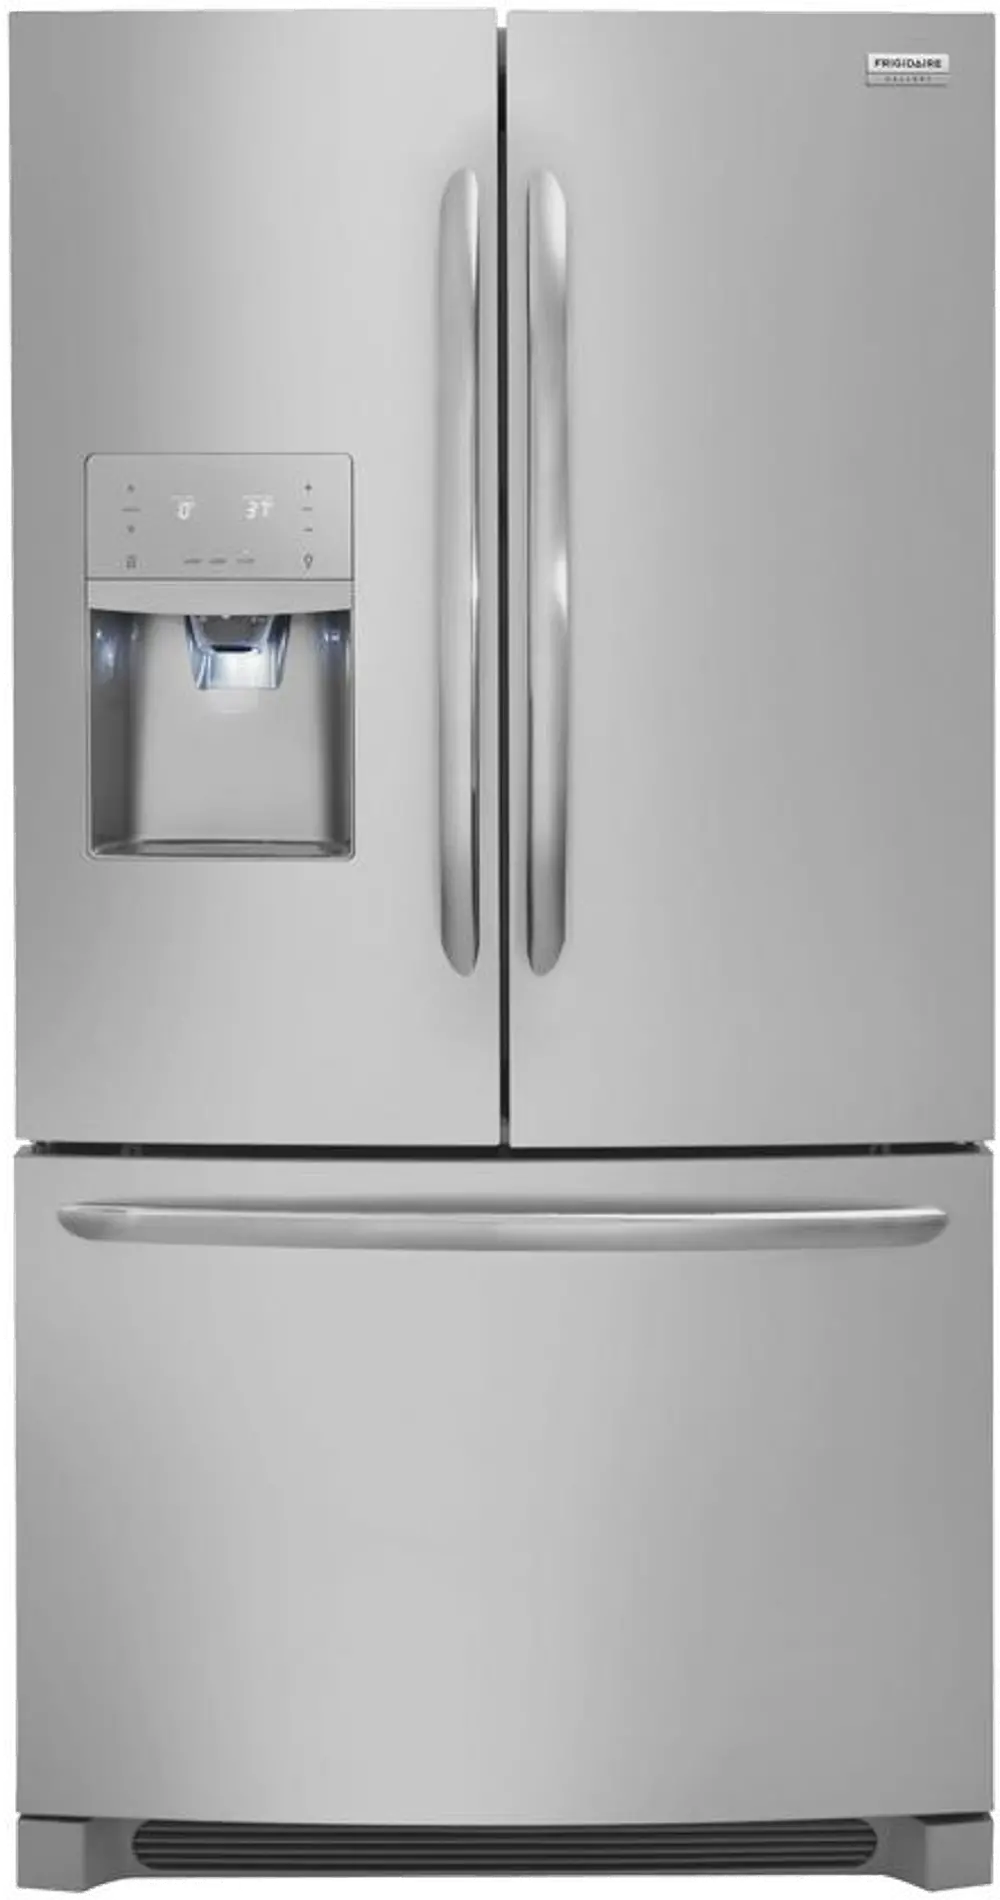 FGHB2868TF Frigidaire Gallery 26.8 cu ft French Door Refrigerator - Stainless Steel-1